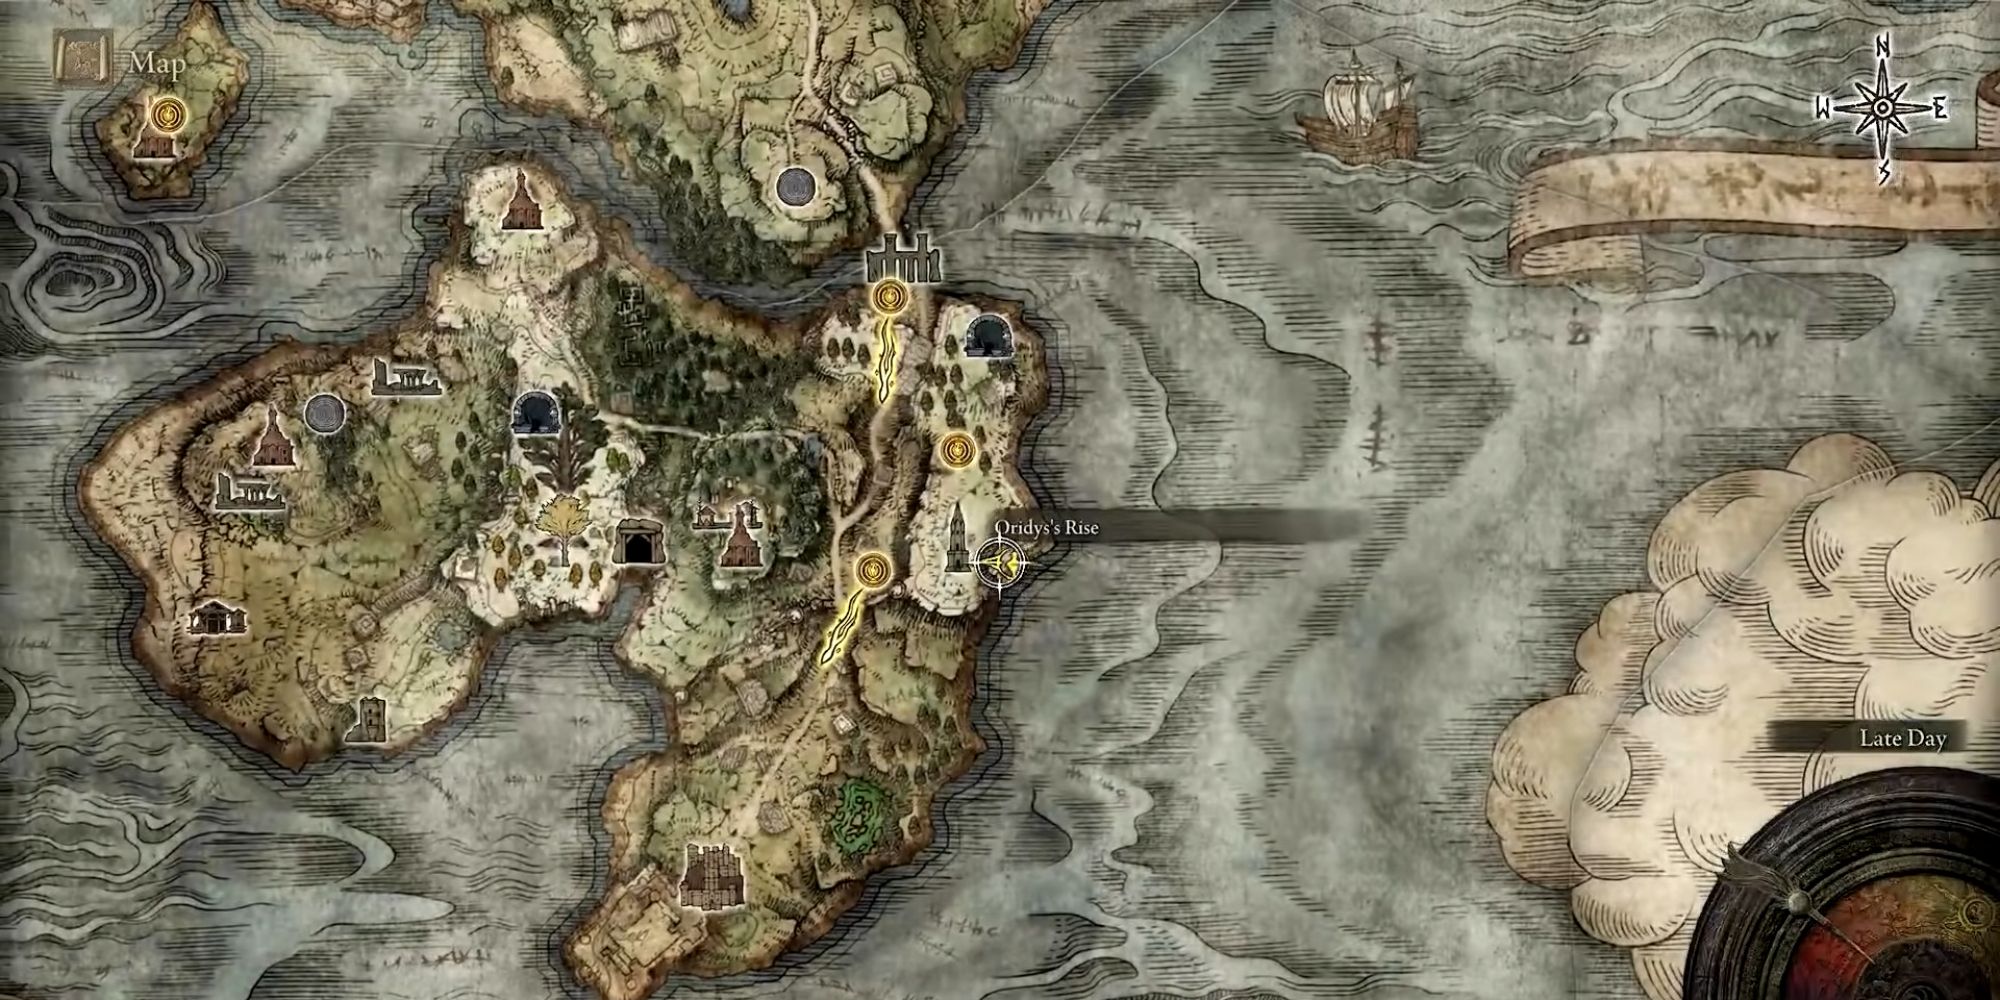 Oridys's Rise location displayed on a map in Elden Ring